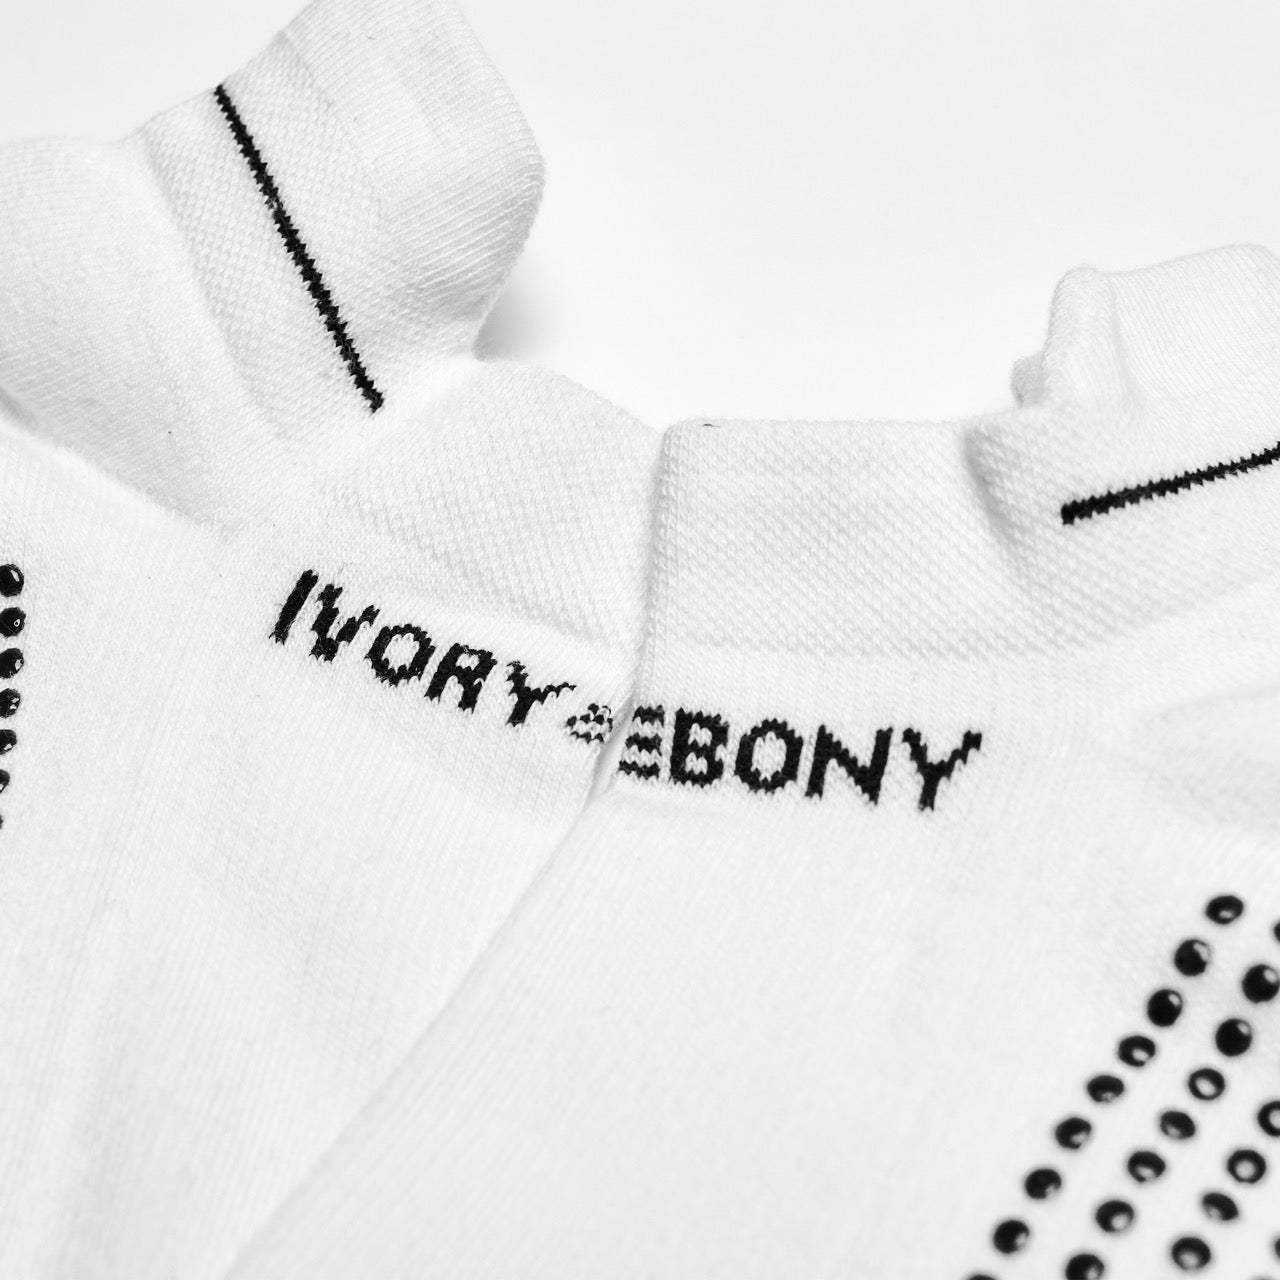 Anti Slip White Ankle Socks from Ivory & Ebony with Extra-Long Staple Cotton, Cushioned Footbed, Blister Tab and Seamless Toe